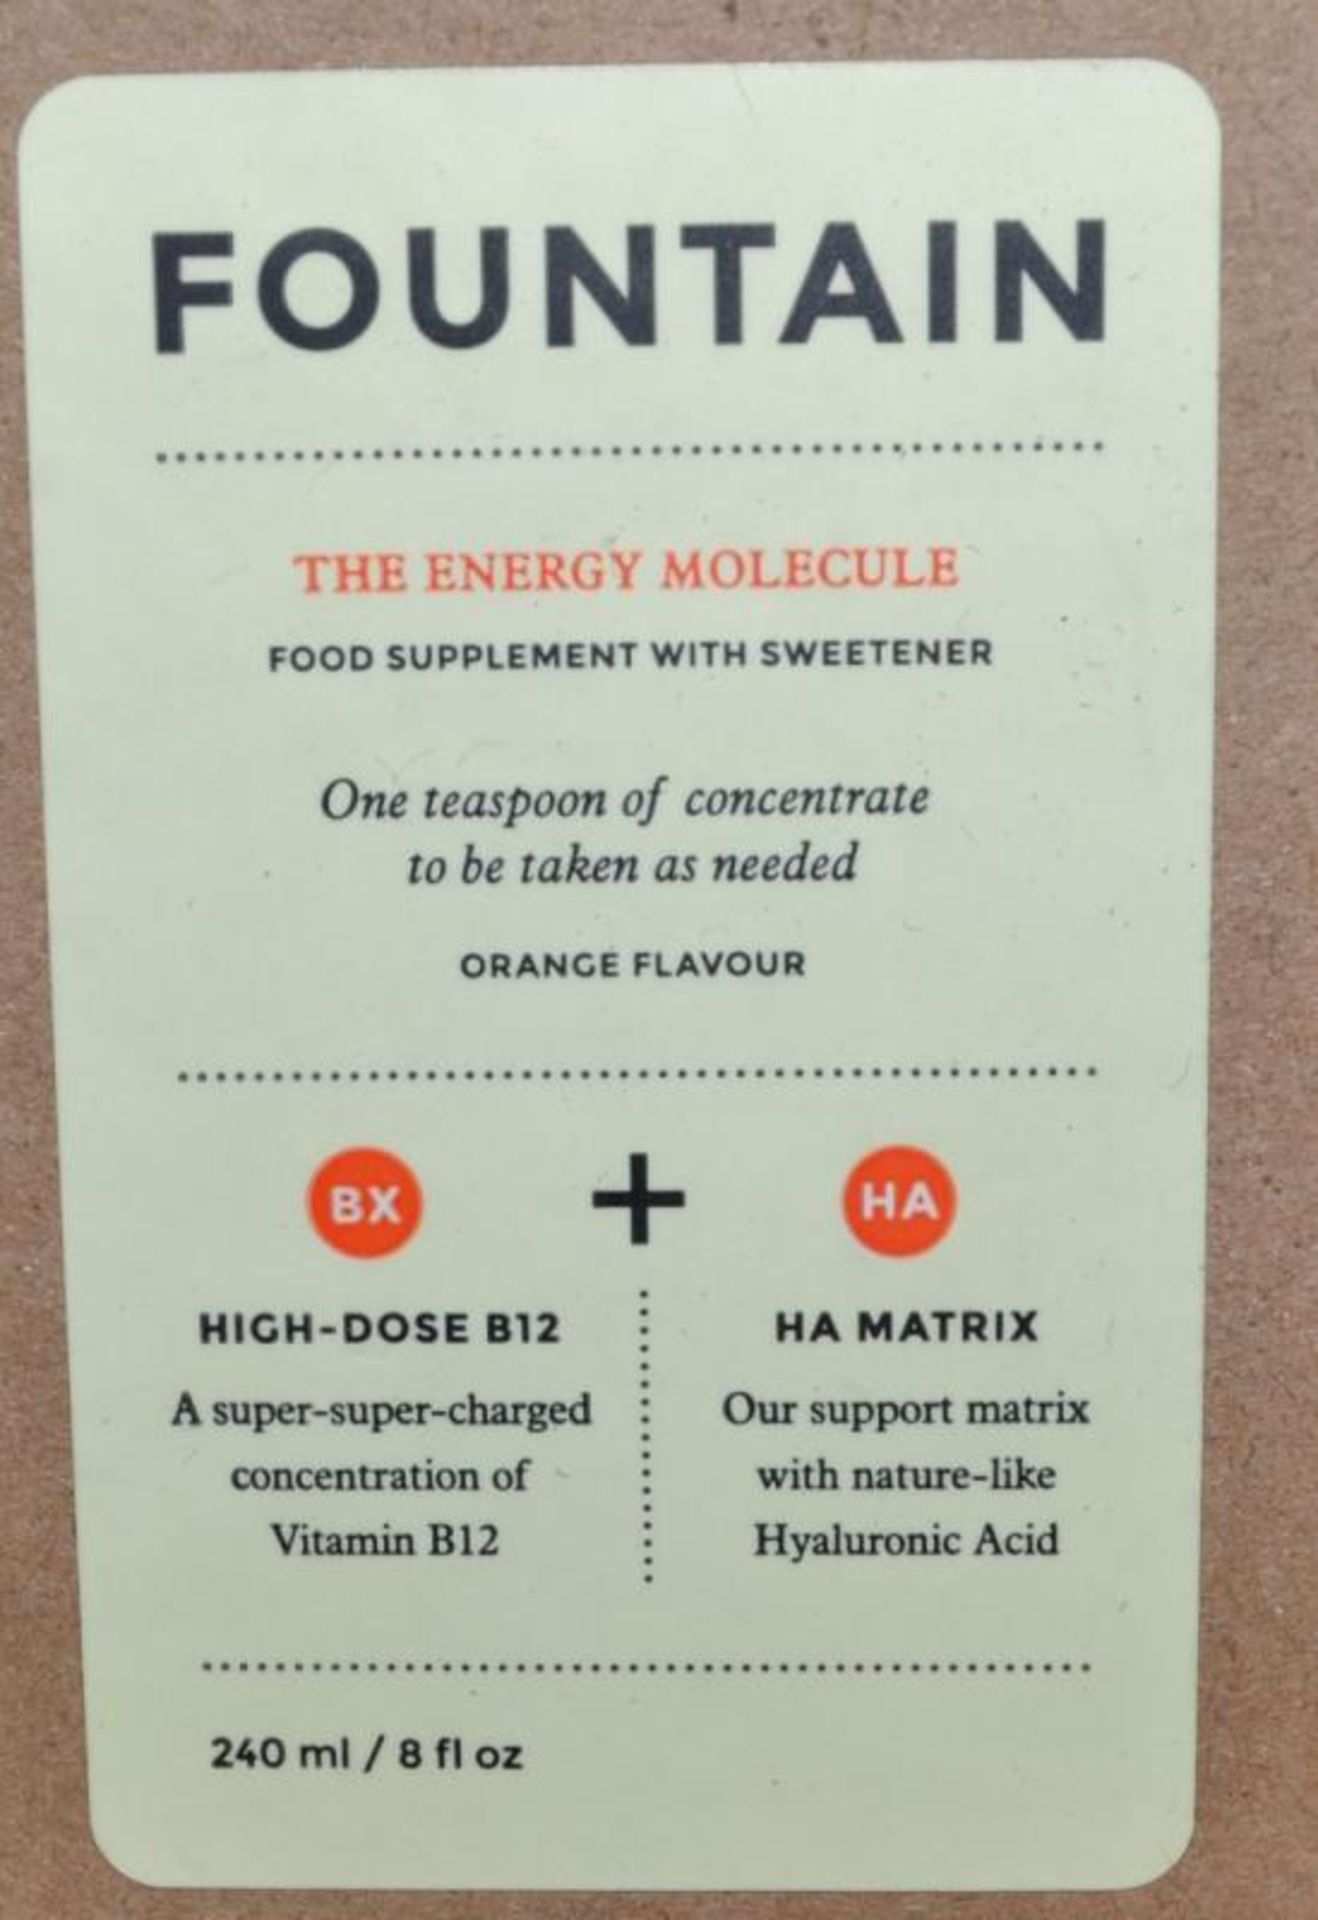 10 x 240ml Bottles of Fountain, The Energy Molecule Supplement - New & Boxed - CL185 - Ref: - Image 5 of 7